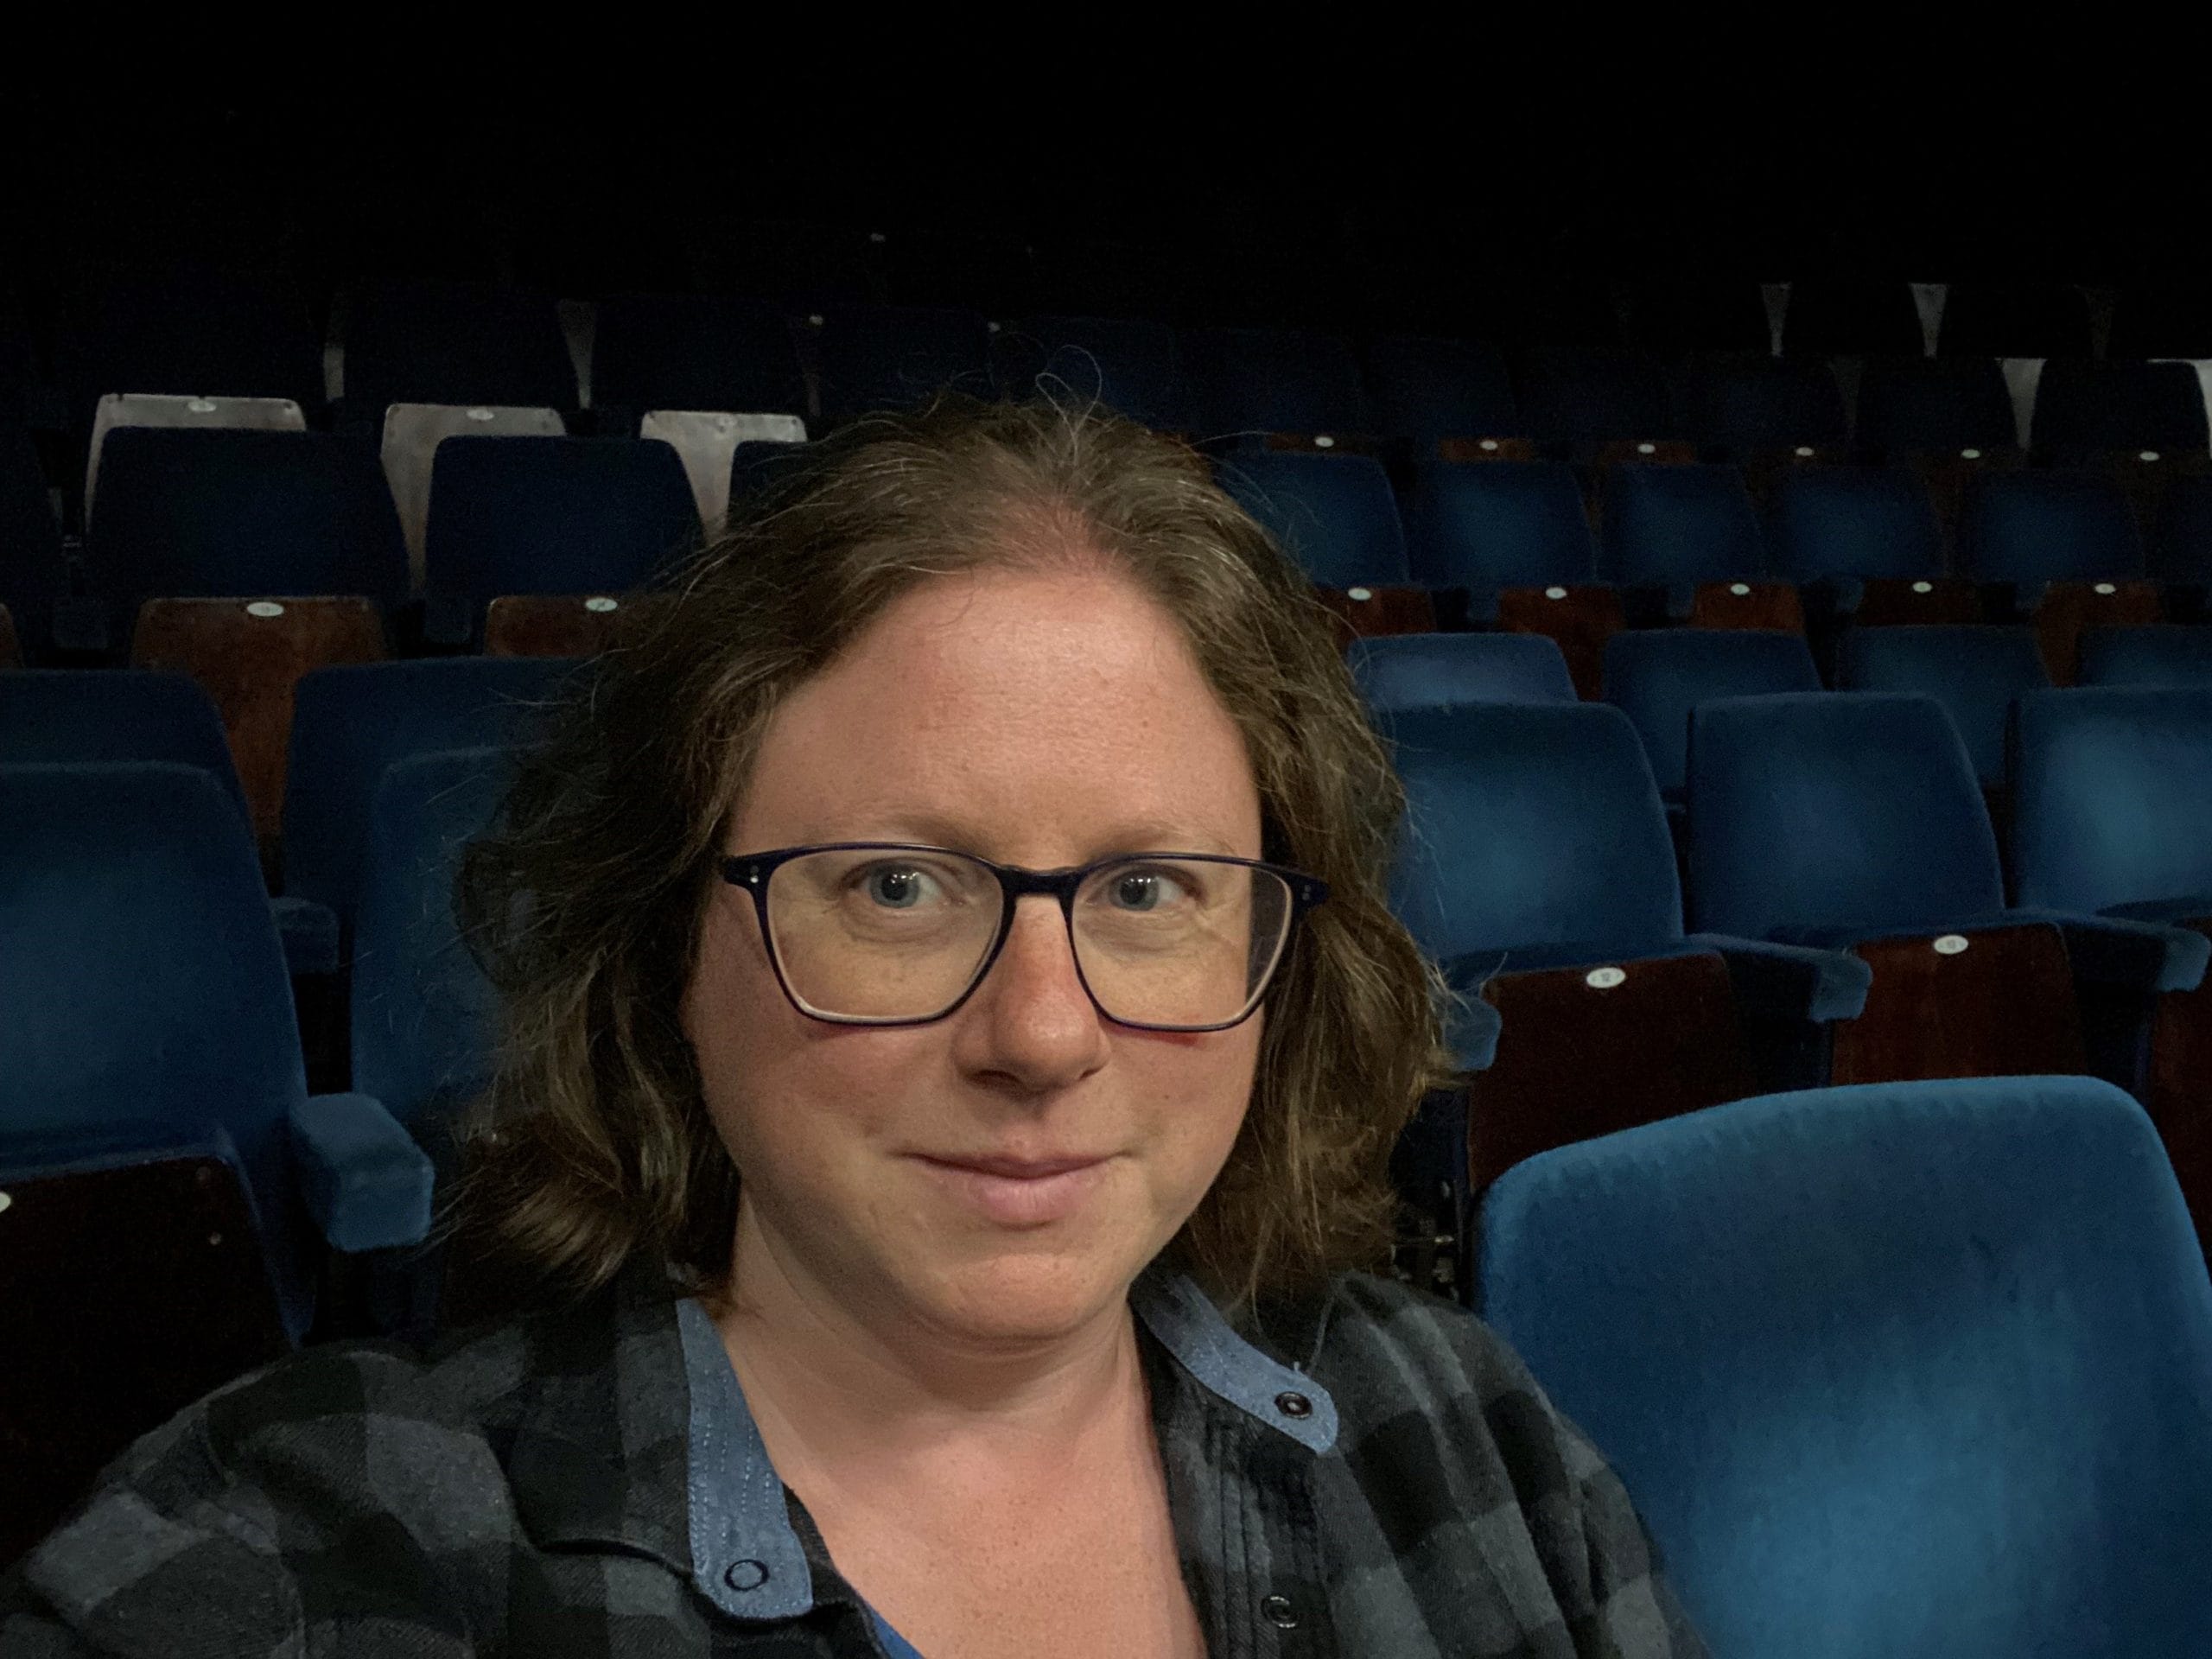 Rachel Barnett Jones poses for a selfie in a theatre auditorium. The seats behind her are blue velvet. Rachel faces the camera with a smile. She has short-mid length brown hair and is wearing glasses and a blue plaid shirt.